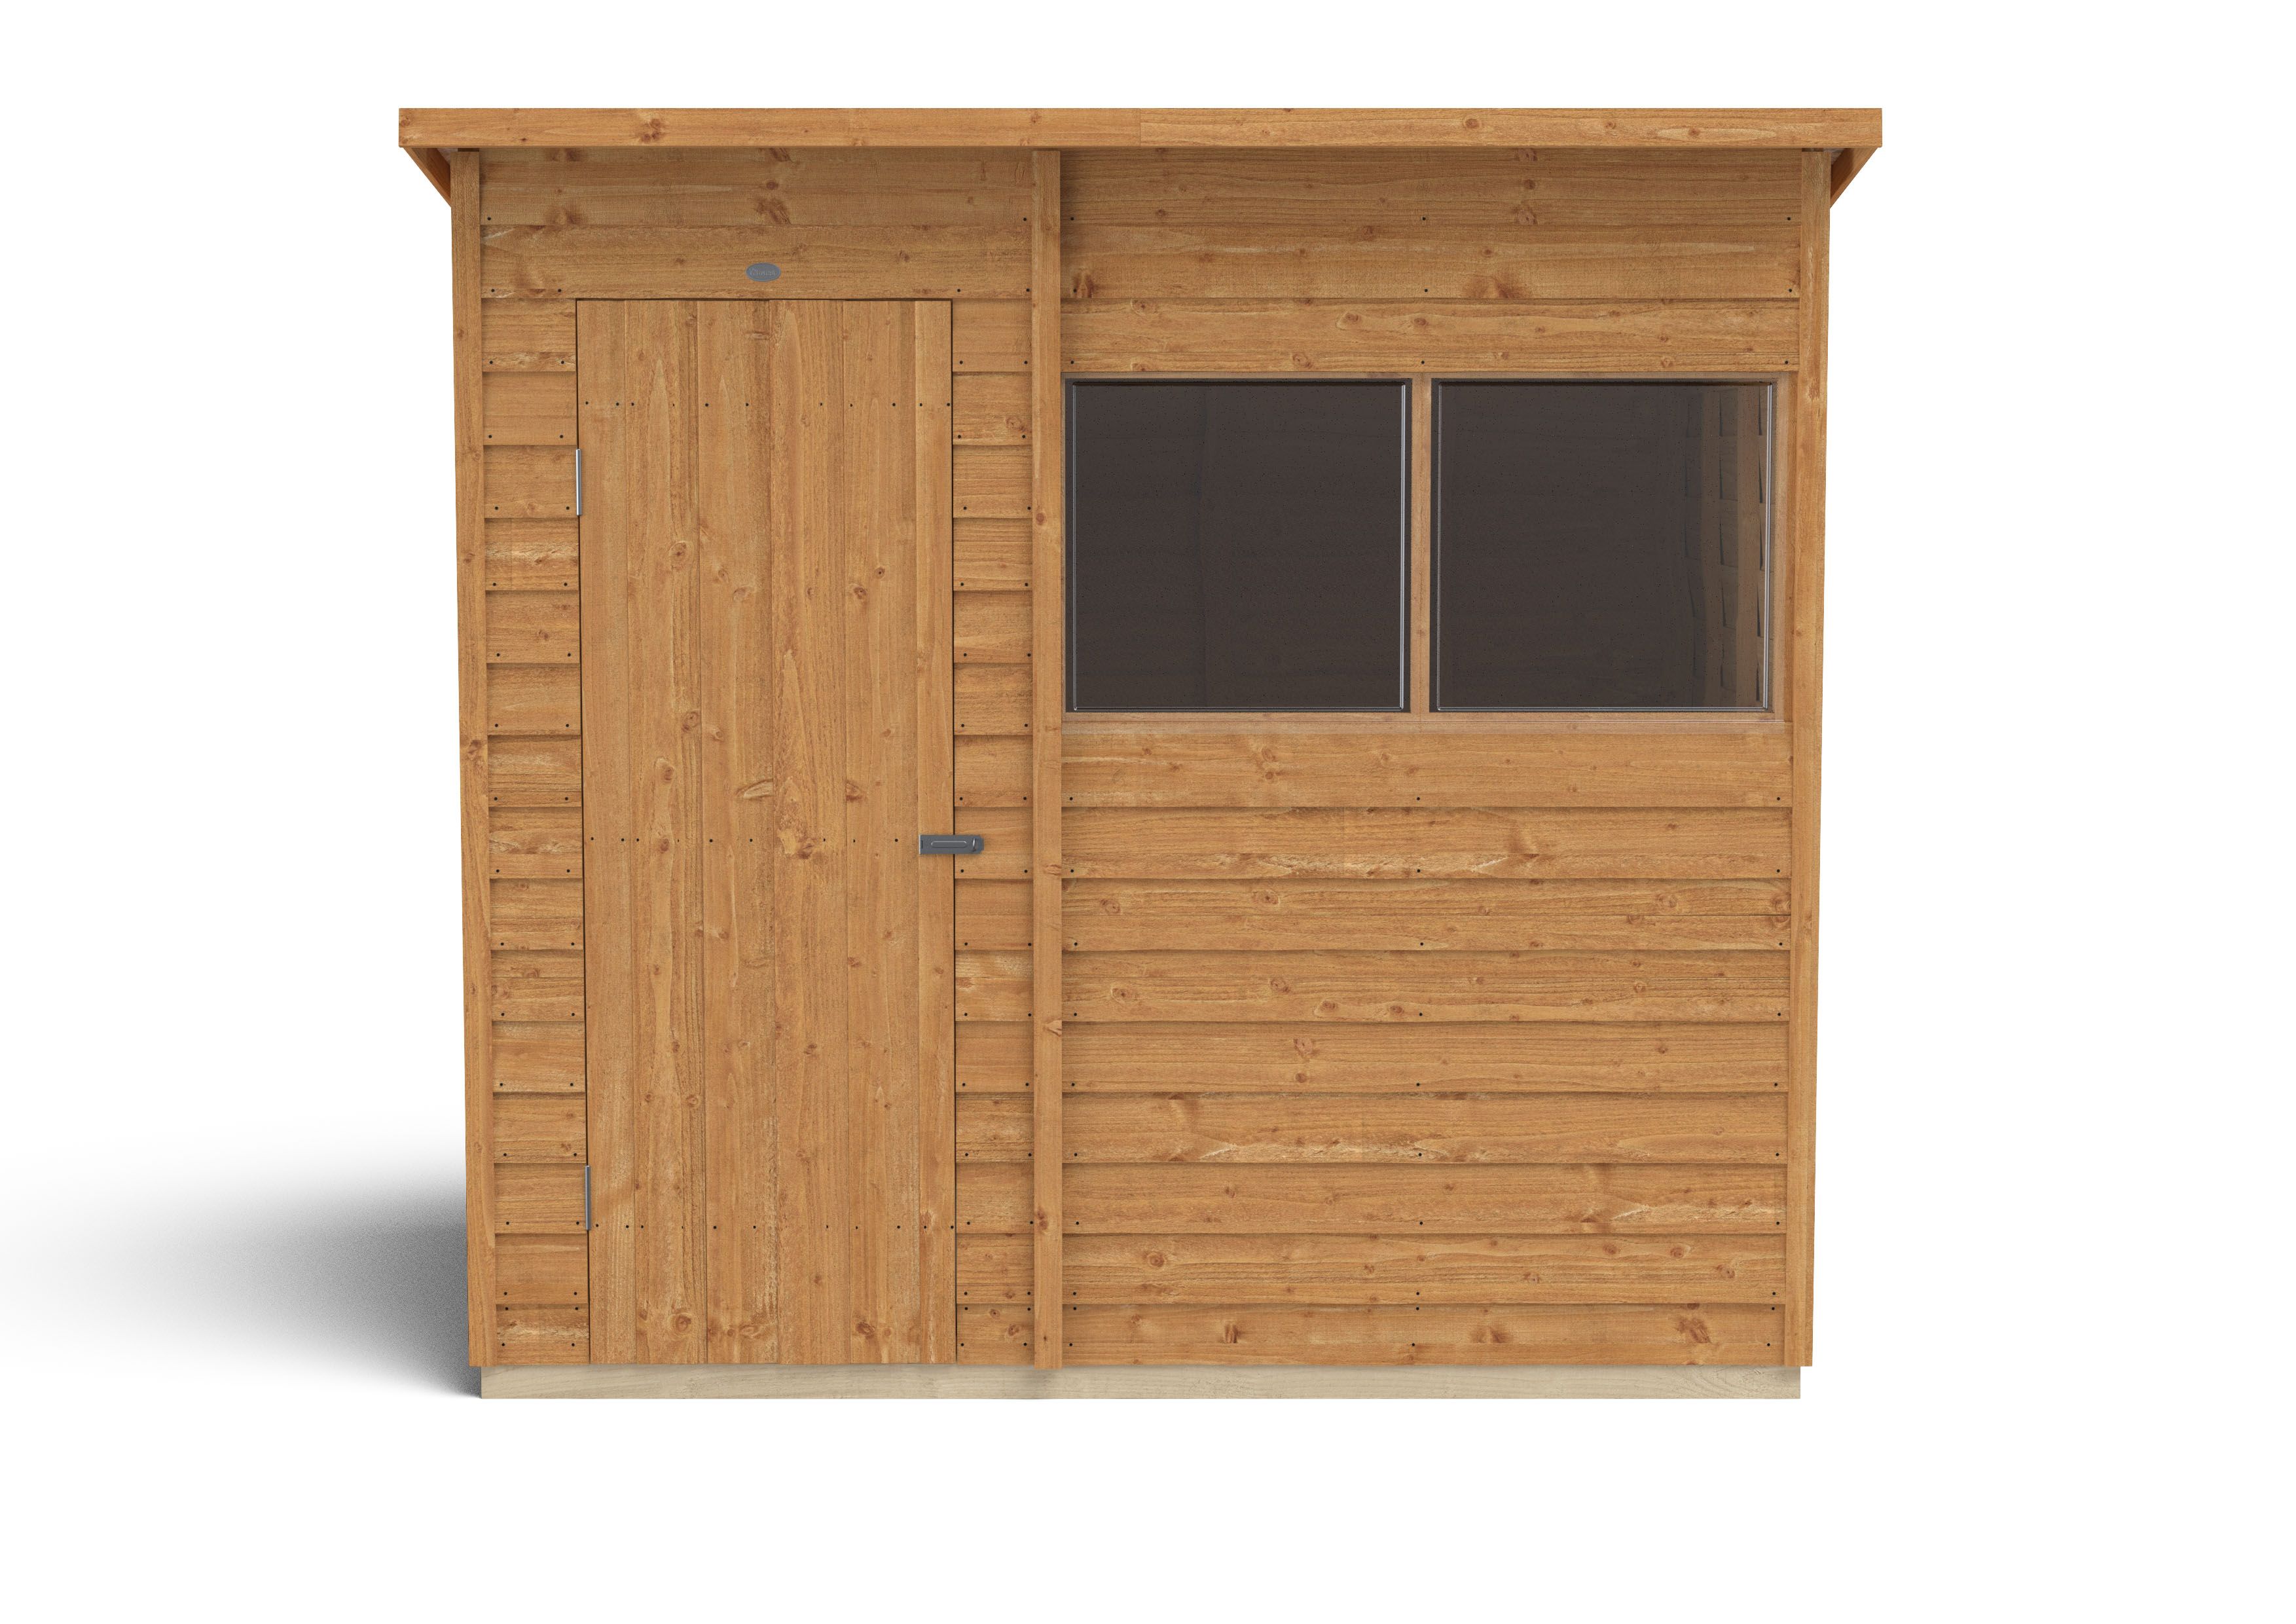 Forest Garden Overlap 7x5 ft Pent Wooden Dip treated Shed with floor & 2 windows - Assembly service included